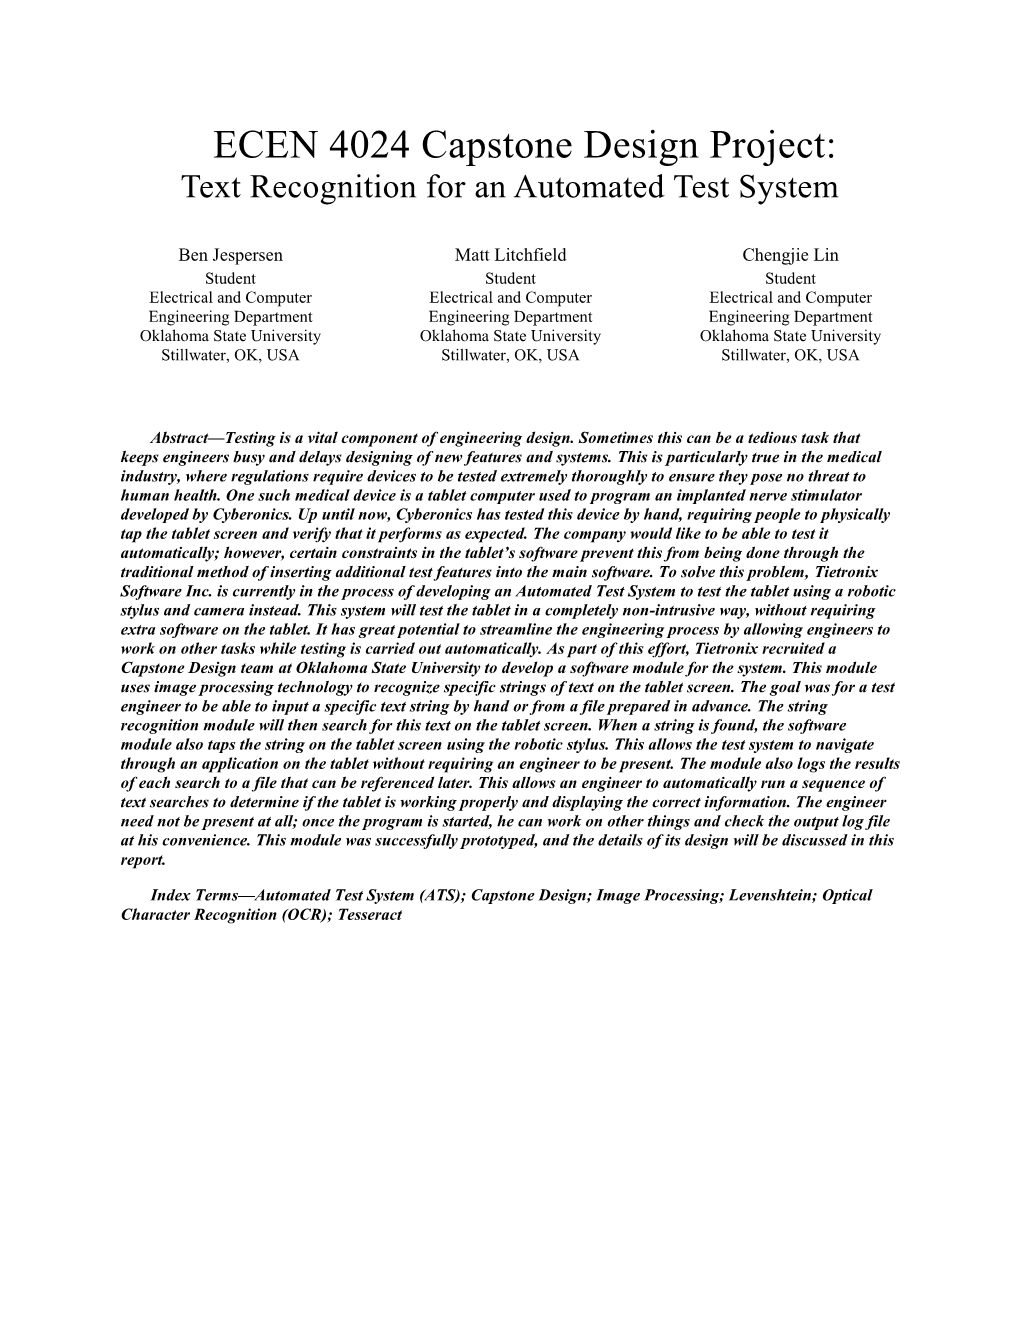 ECEN 4024 Capstone Design Project: Text Recognition for an Automated Test System